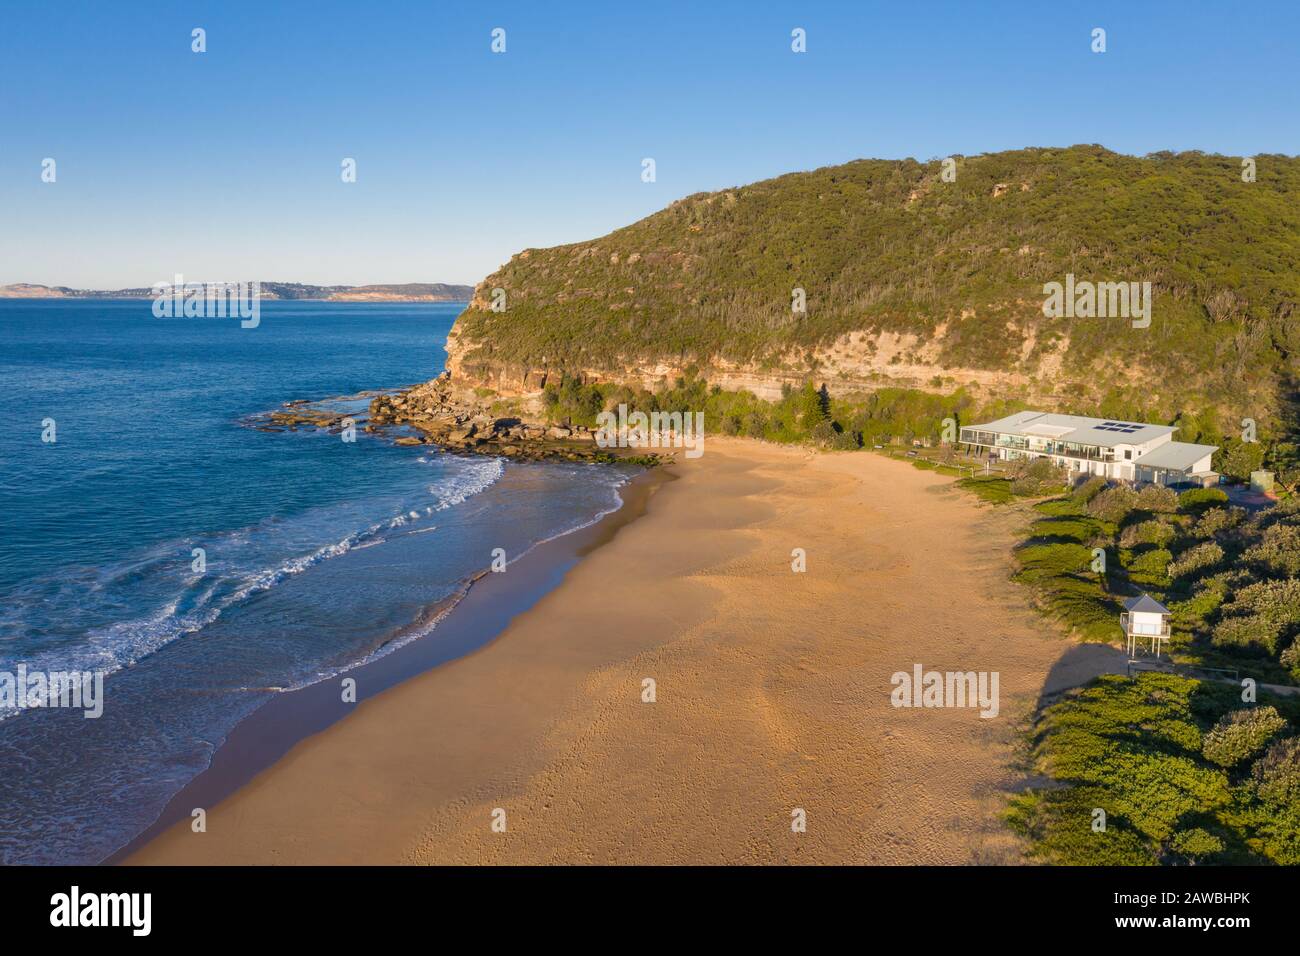 Aerial view of the beautiful Putty Beach at Killcare on the NSW central coast. Putty Beach - NSW Australia Stock Photo